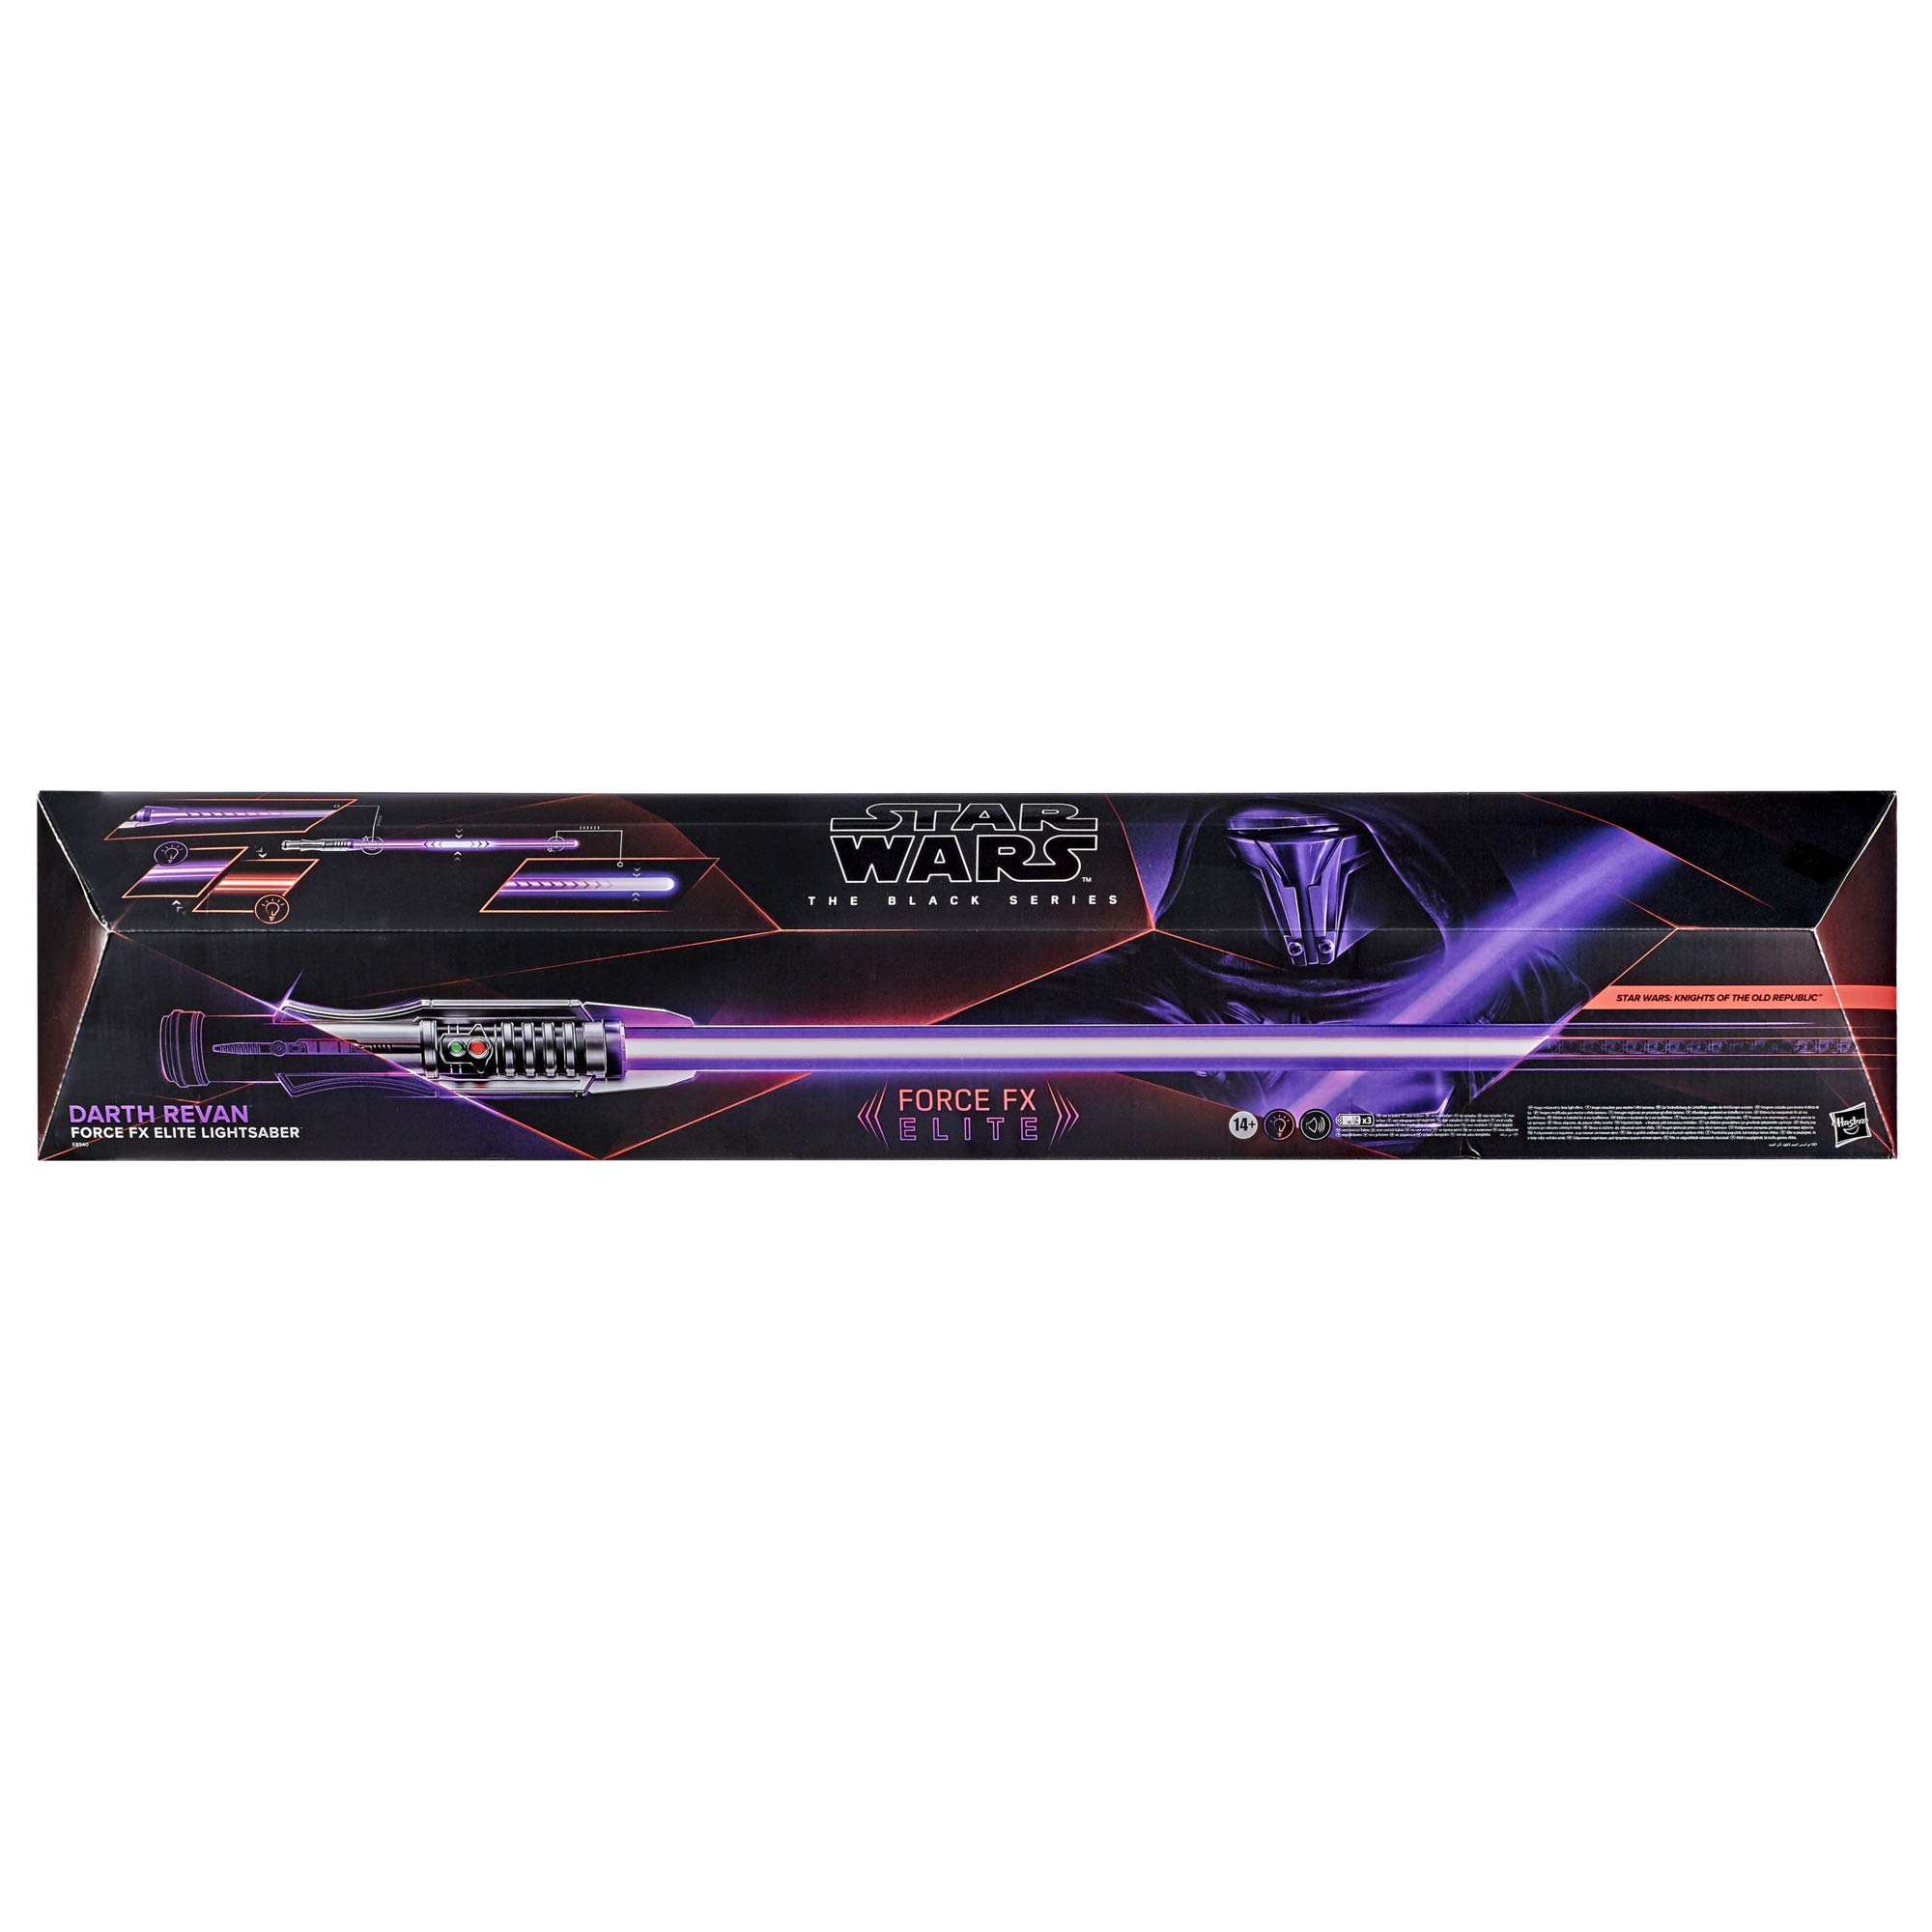 STAR WARS The Black Series Darth Revan Force FX Elite Lightsaber with Advanced LED and Sound Effects, Adult Collectible Roleplay Item